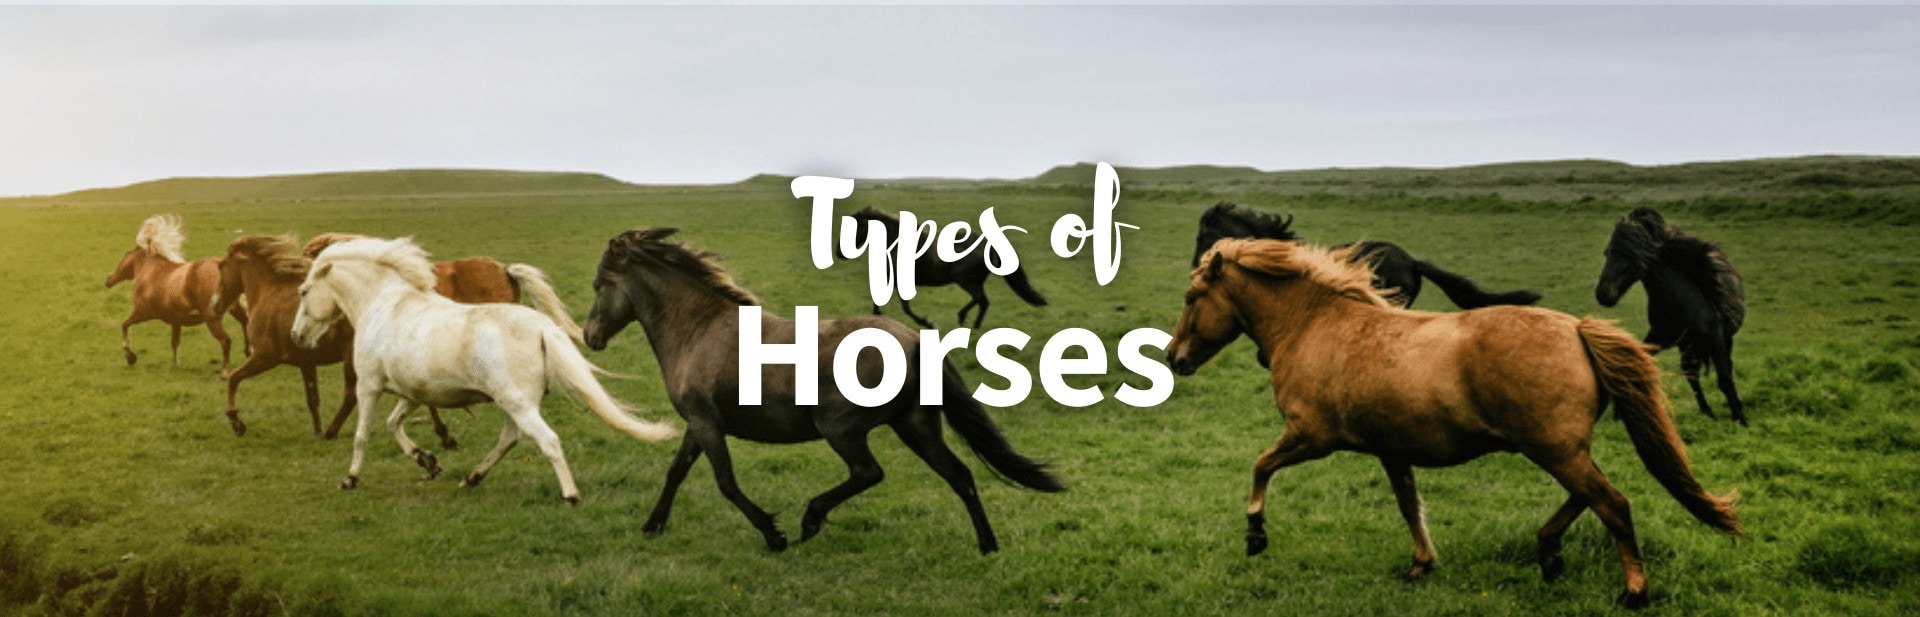 All Types of Horses: From the Wild to Domesticated